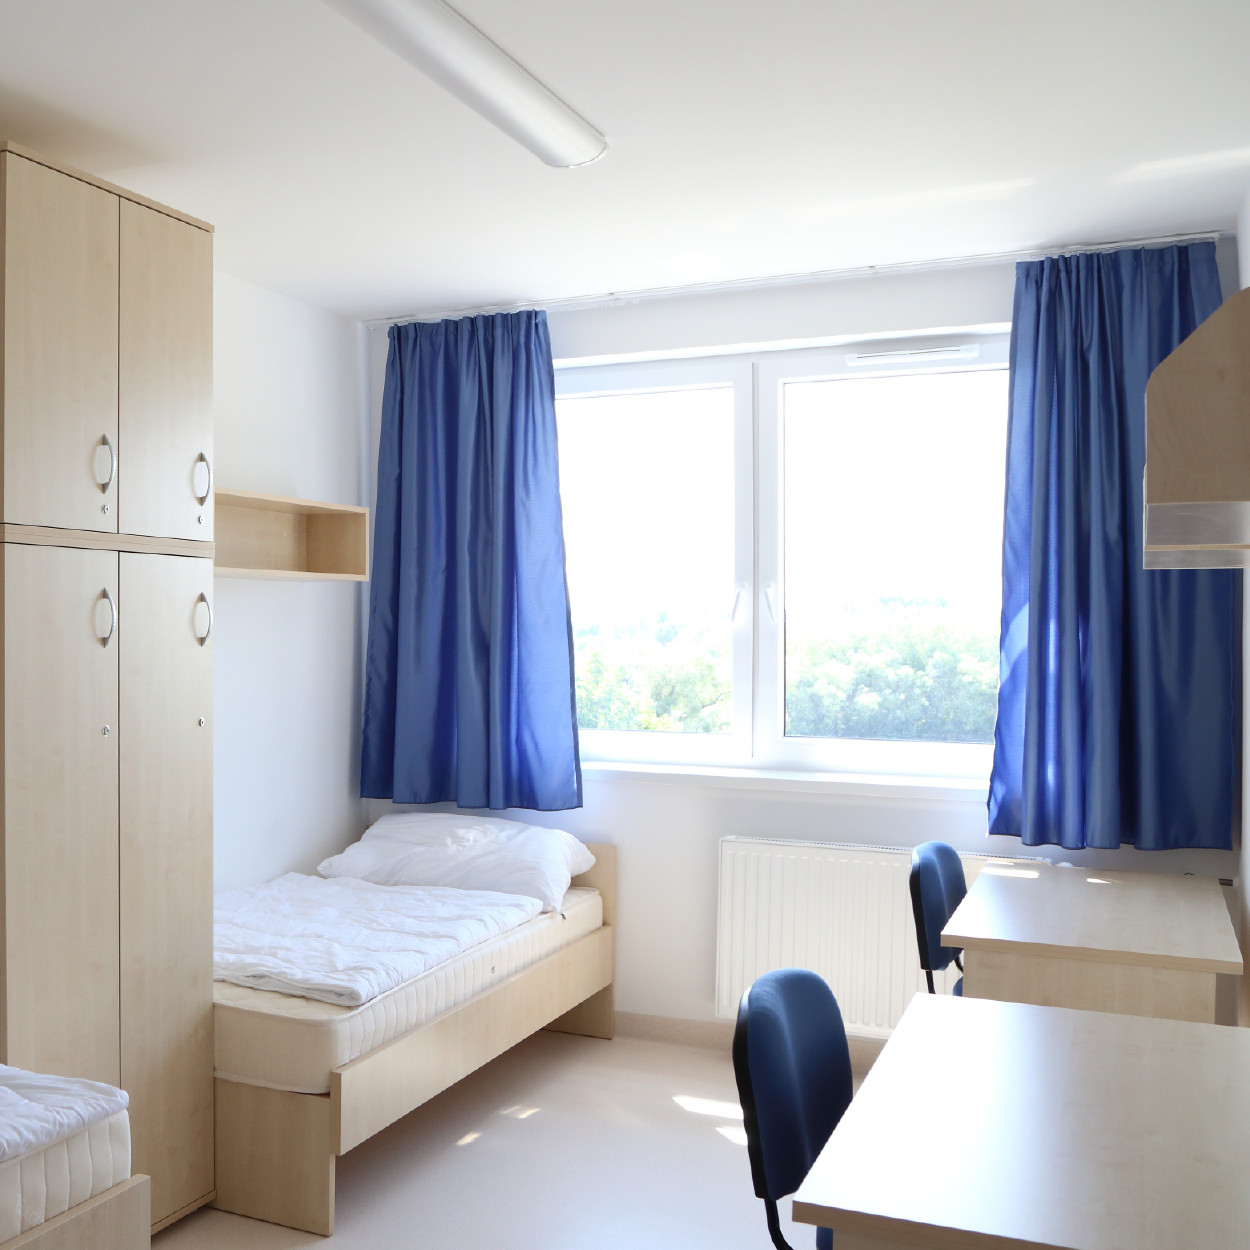 Student Hall of residence